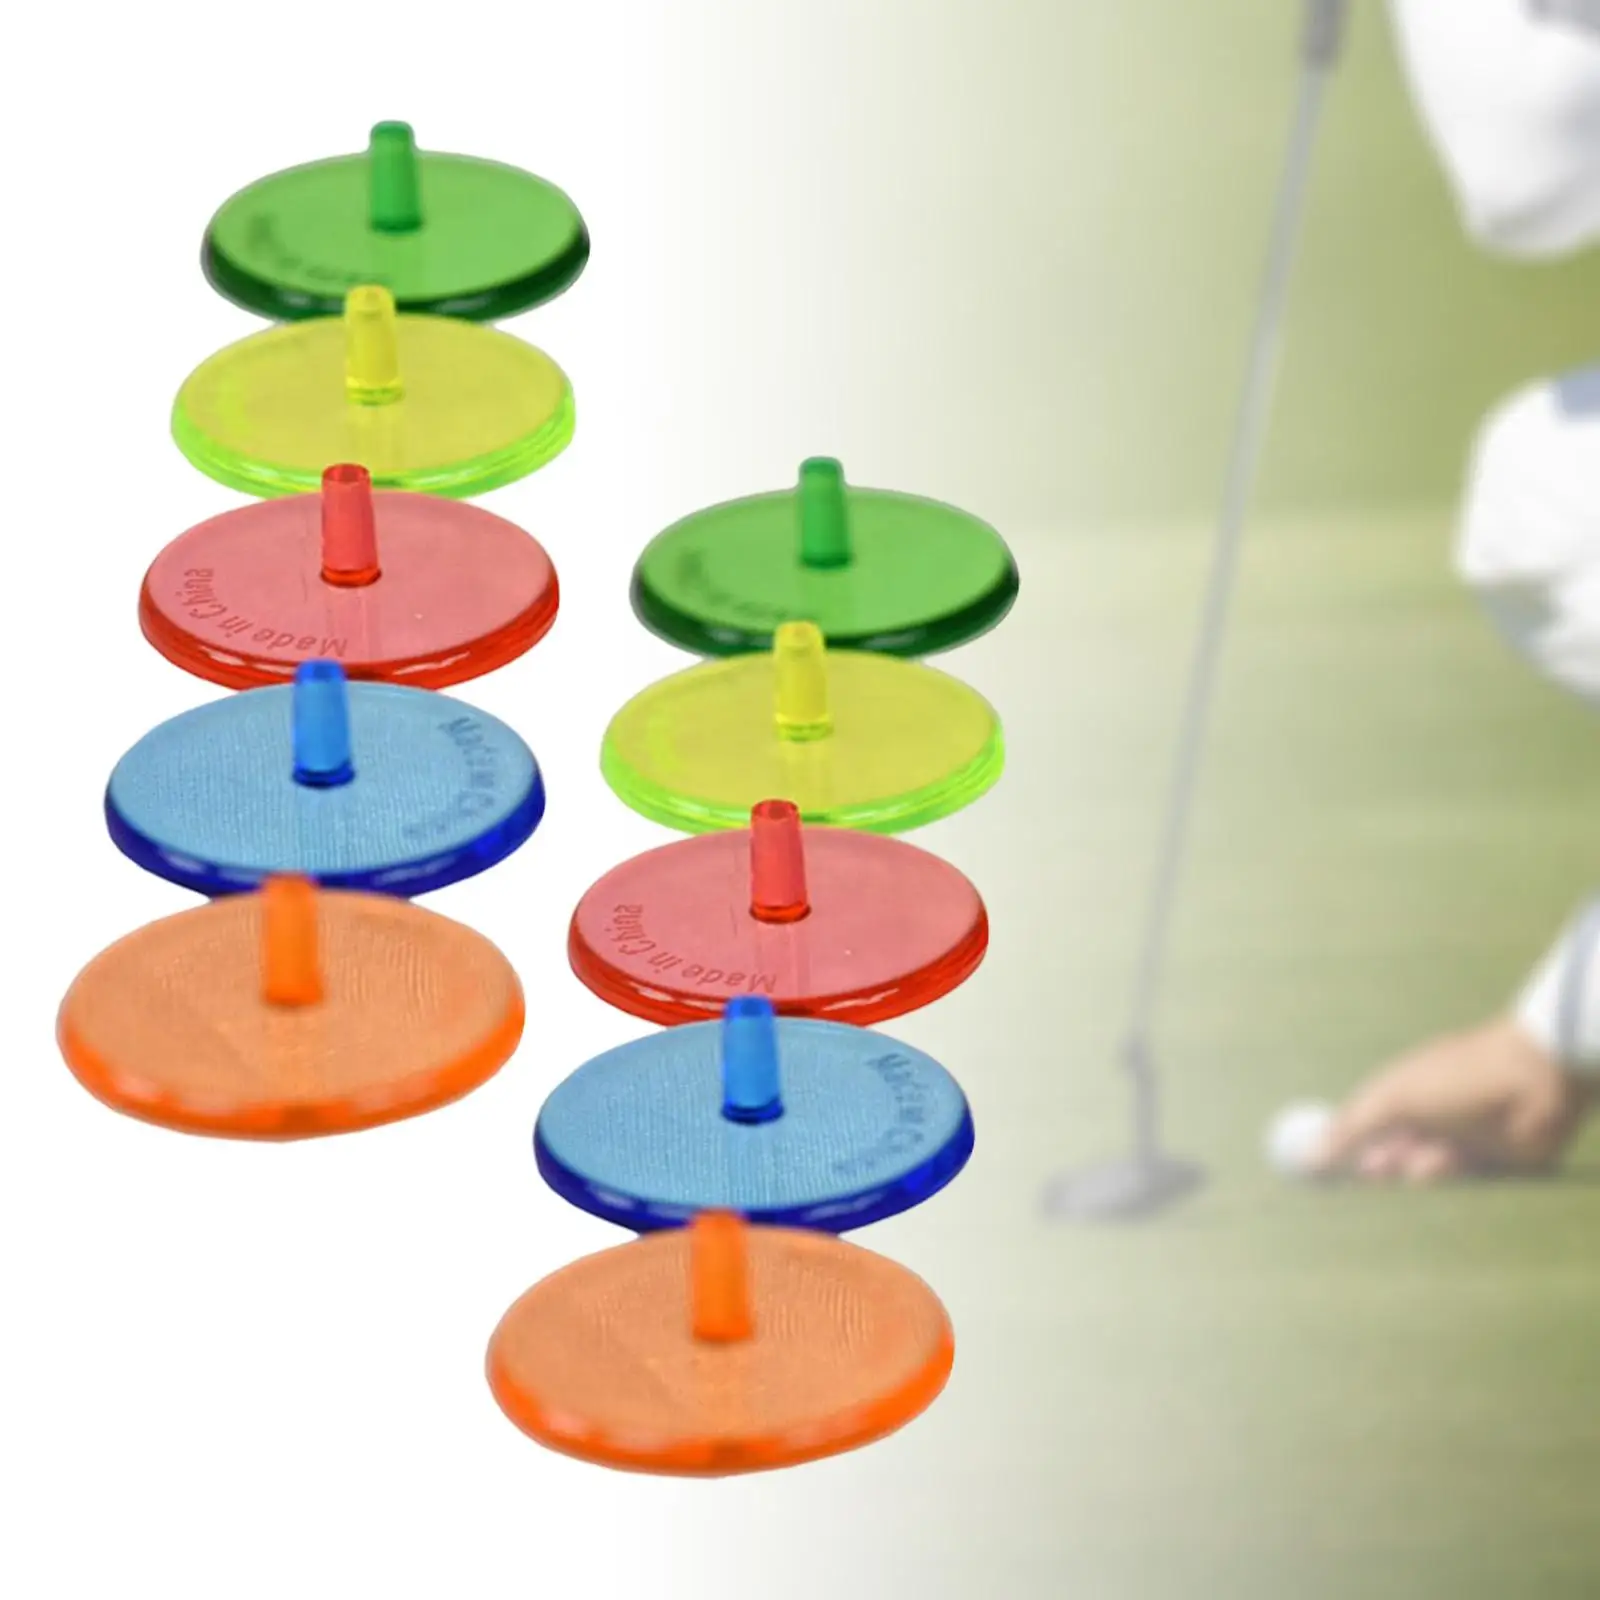 10x Golf Ball Markers  Gift Position  Accessories Base Multicolor 24mm for Training Unisex Practice Outdoor